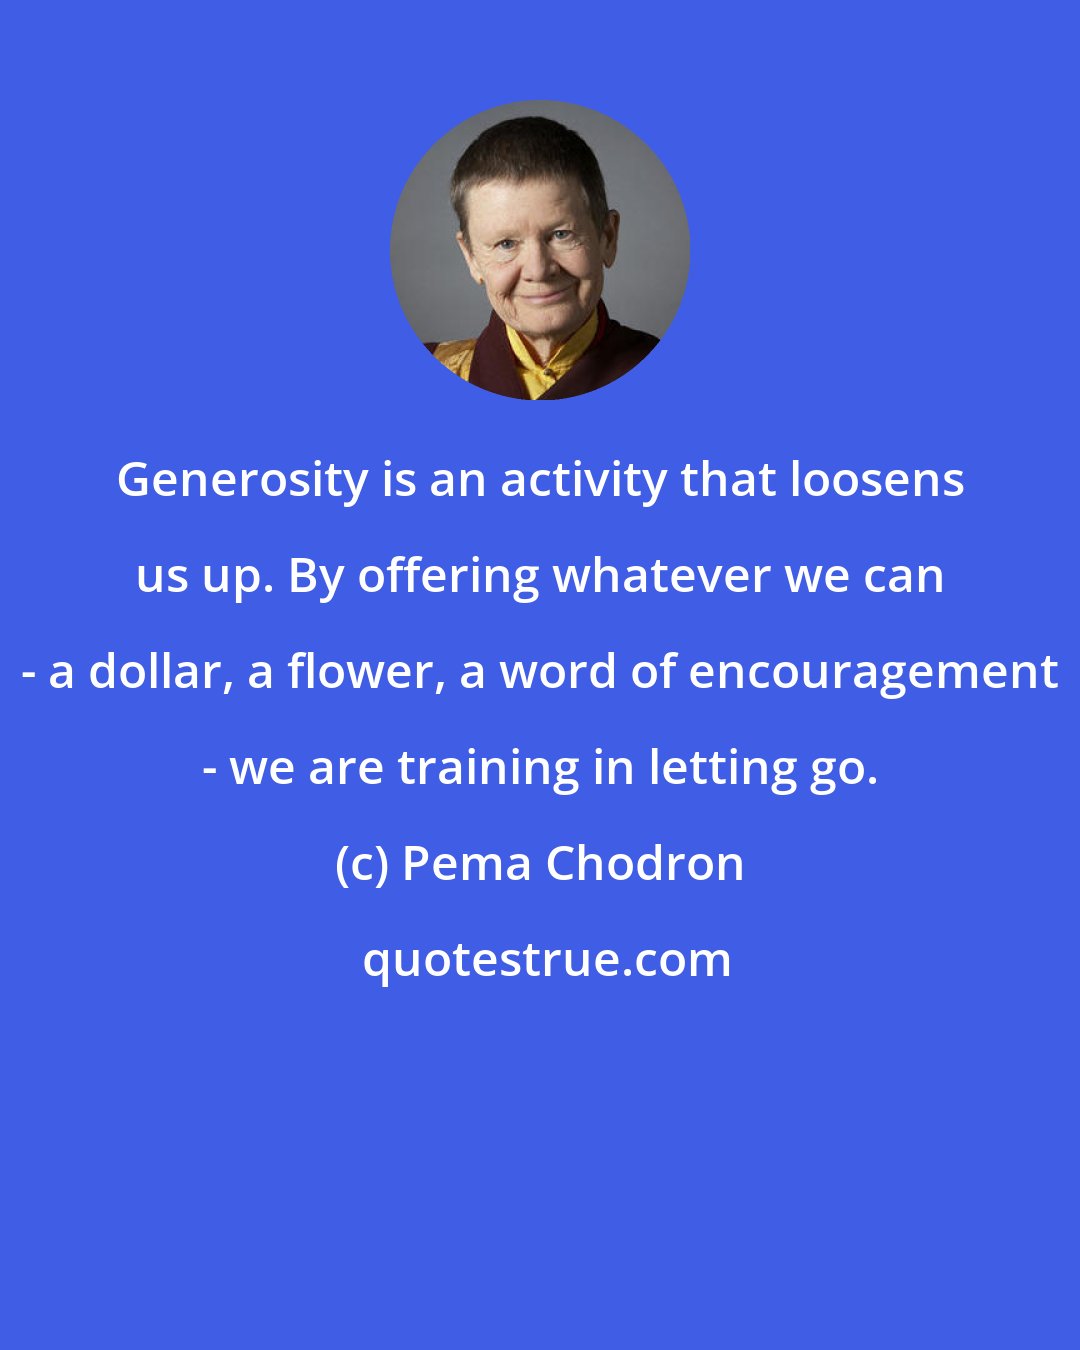 Pema Chodron: Generosity is an activity that loosens us up. By offering whatever we can - a dollar, a flower, a word of encouragement - we are training in letting go.